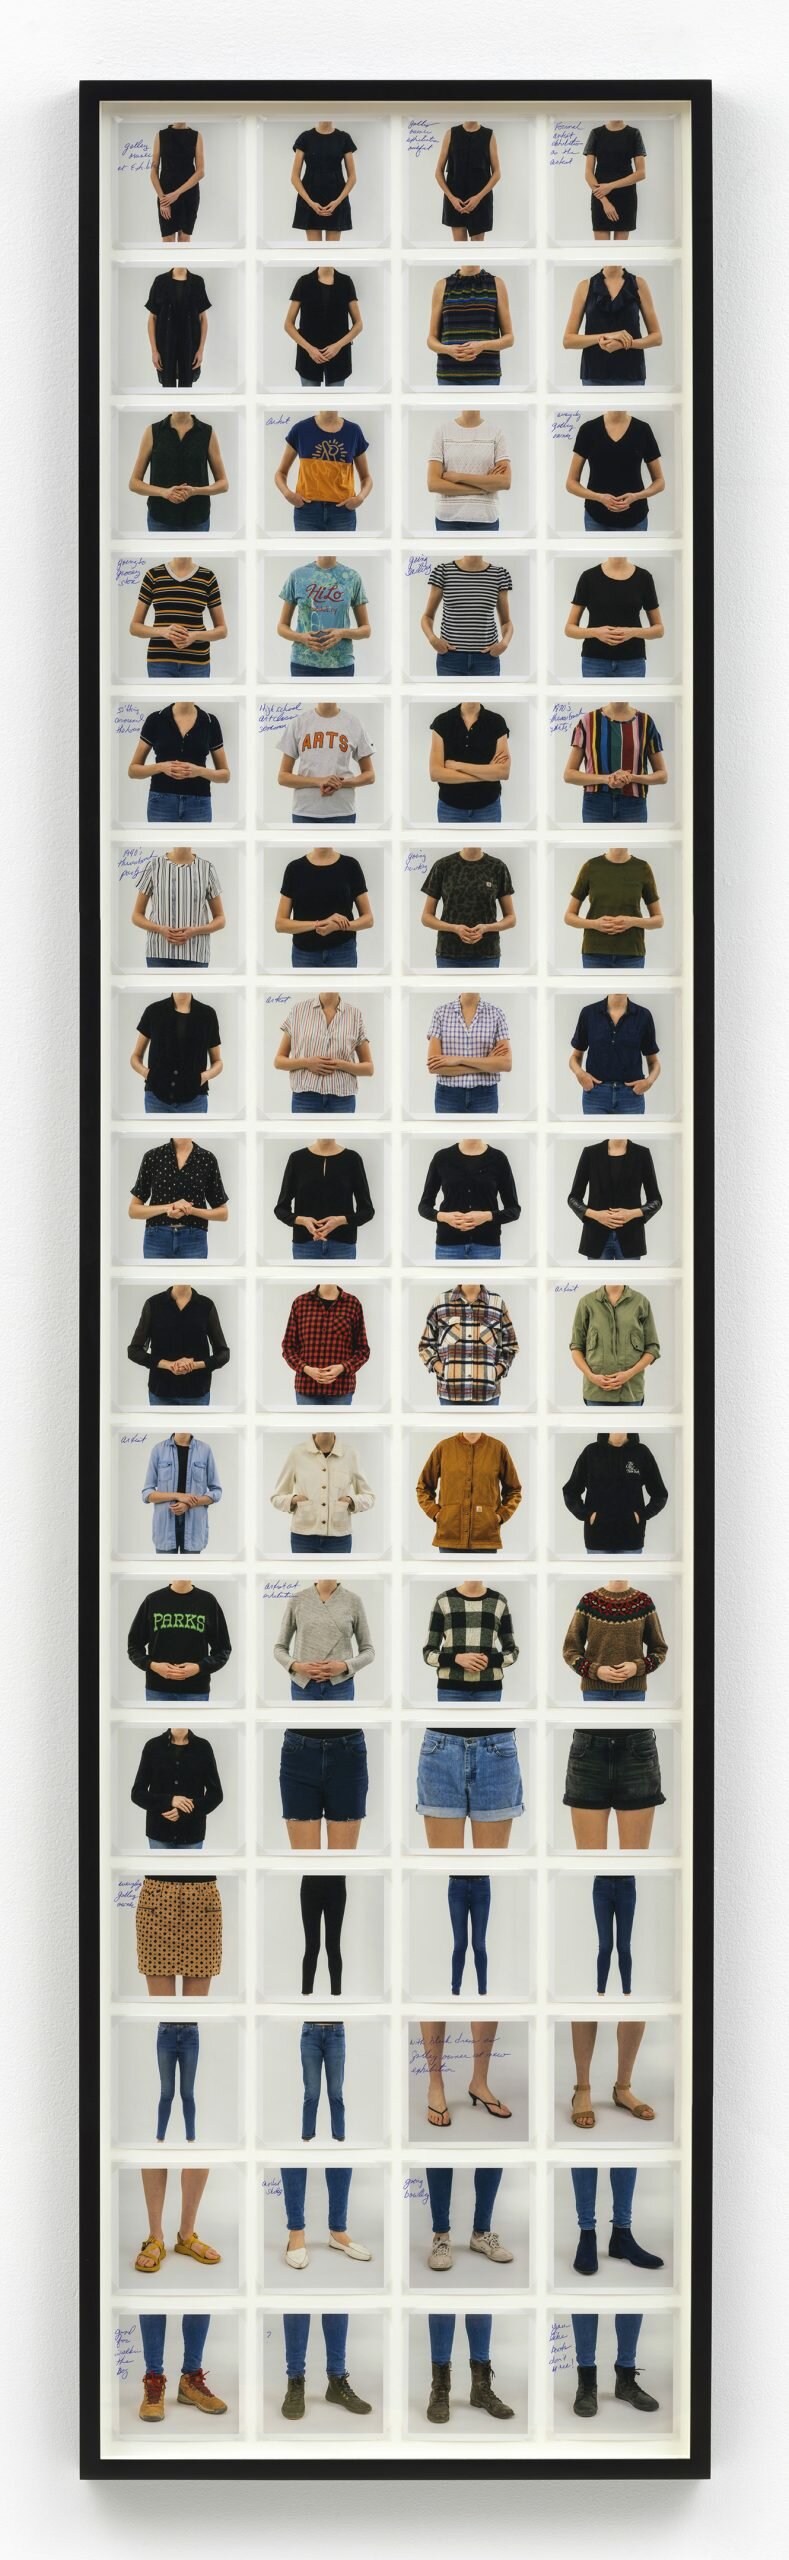 Julia Weist, All My Clothes That Make Me Look Most Convincingly Like An Artist According to Robert K. Wittman, Former FBI Agent Undercover in the Art World, 2021